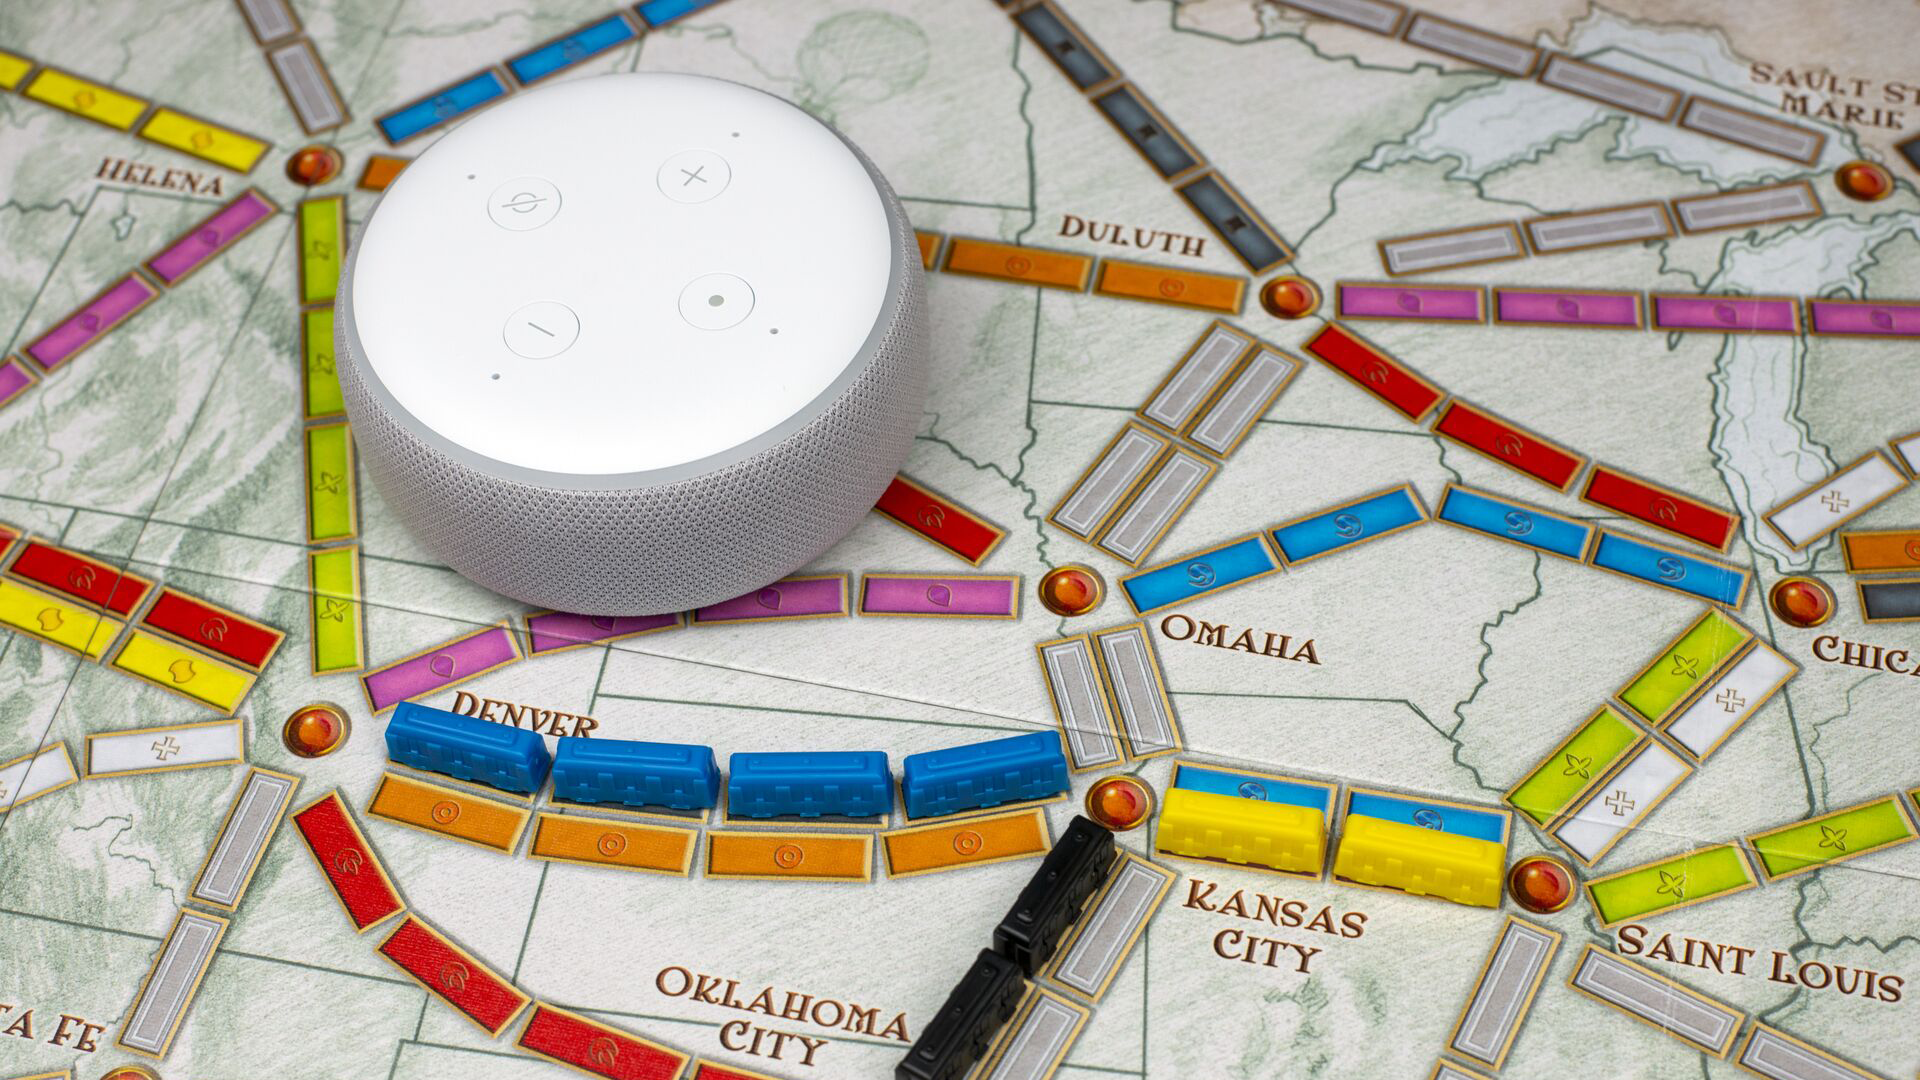 Ticket to Ride board game complete with Alexa support.